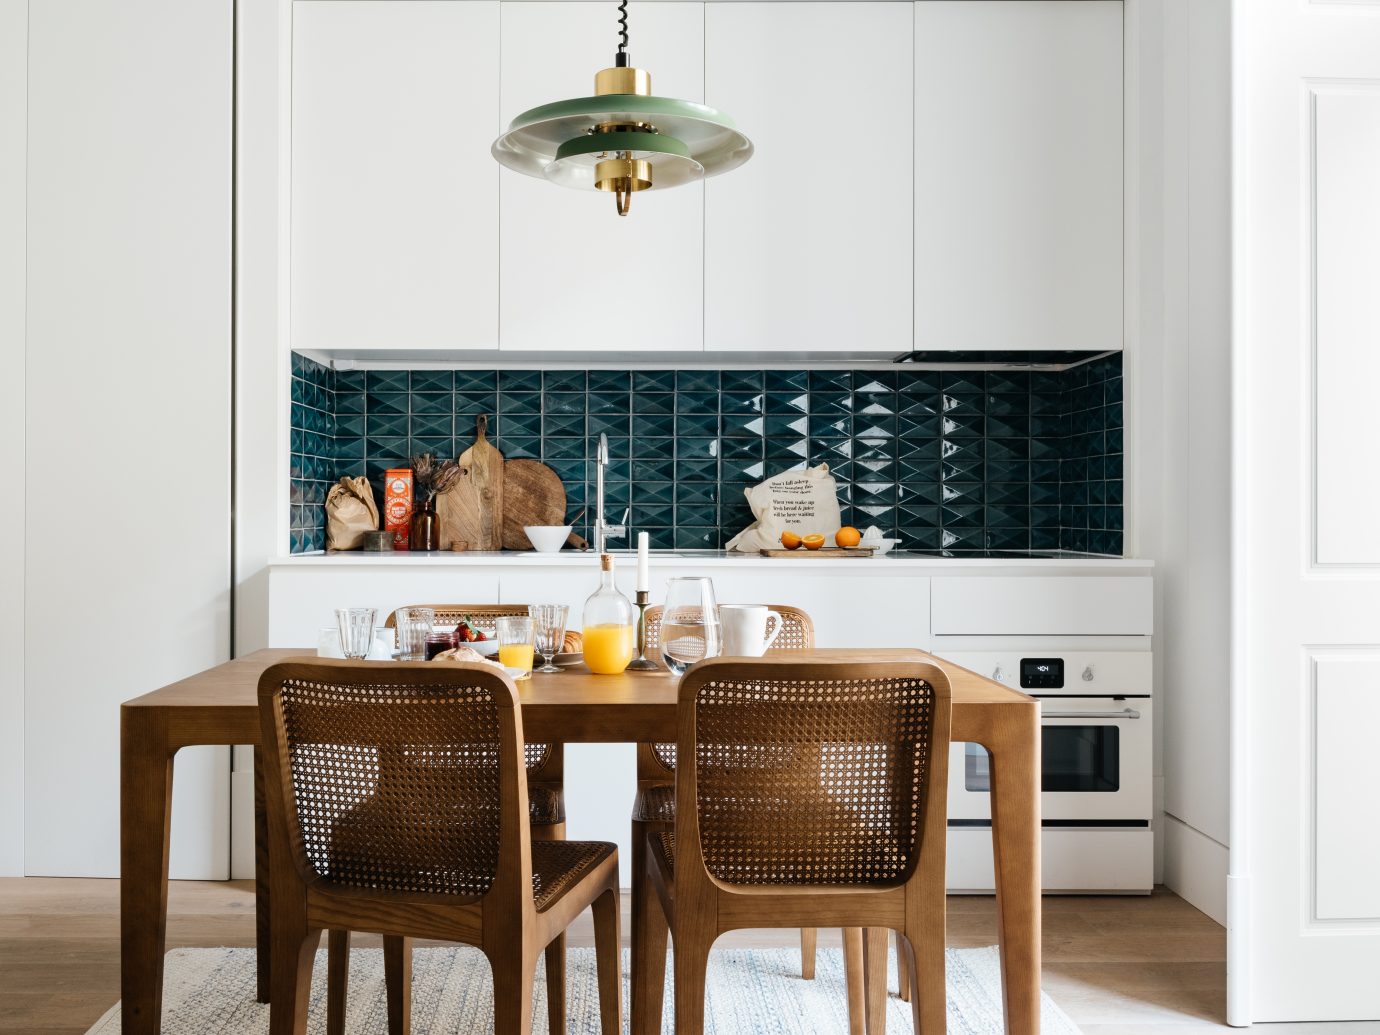 Kitchen interior with basket chairs, a set breakfast on the table, and teal tiling with white cabinets